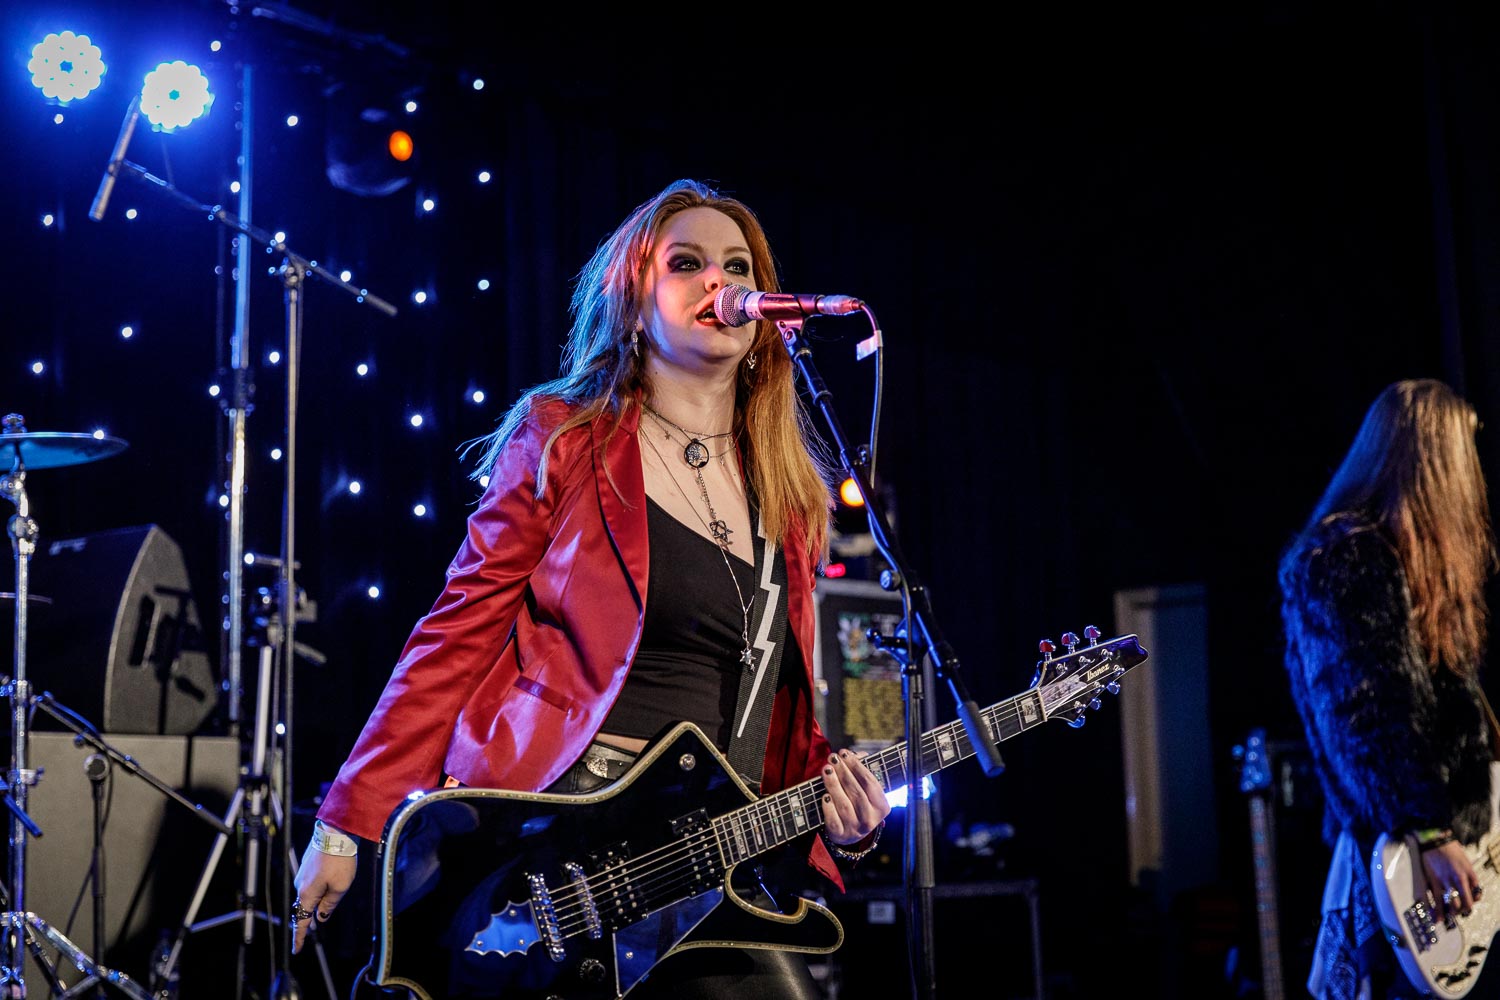 Beth Blade and The Beautiful Disasters at SOS Festival in Prestwich on July 13th 2019 ©Johann Wierzbicki | ROCKFLESH